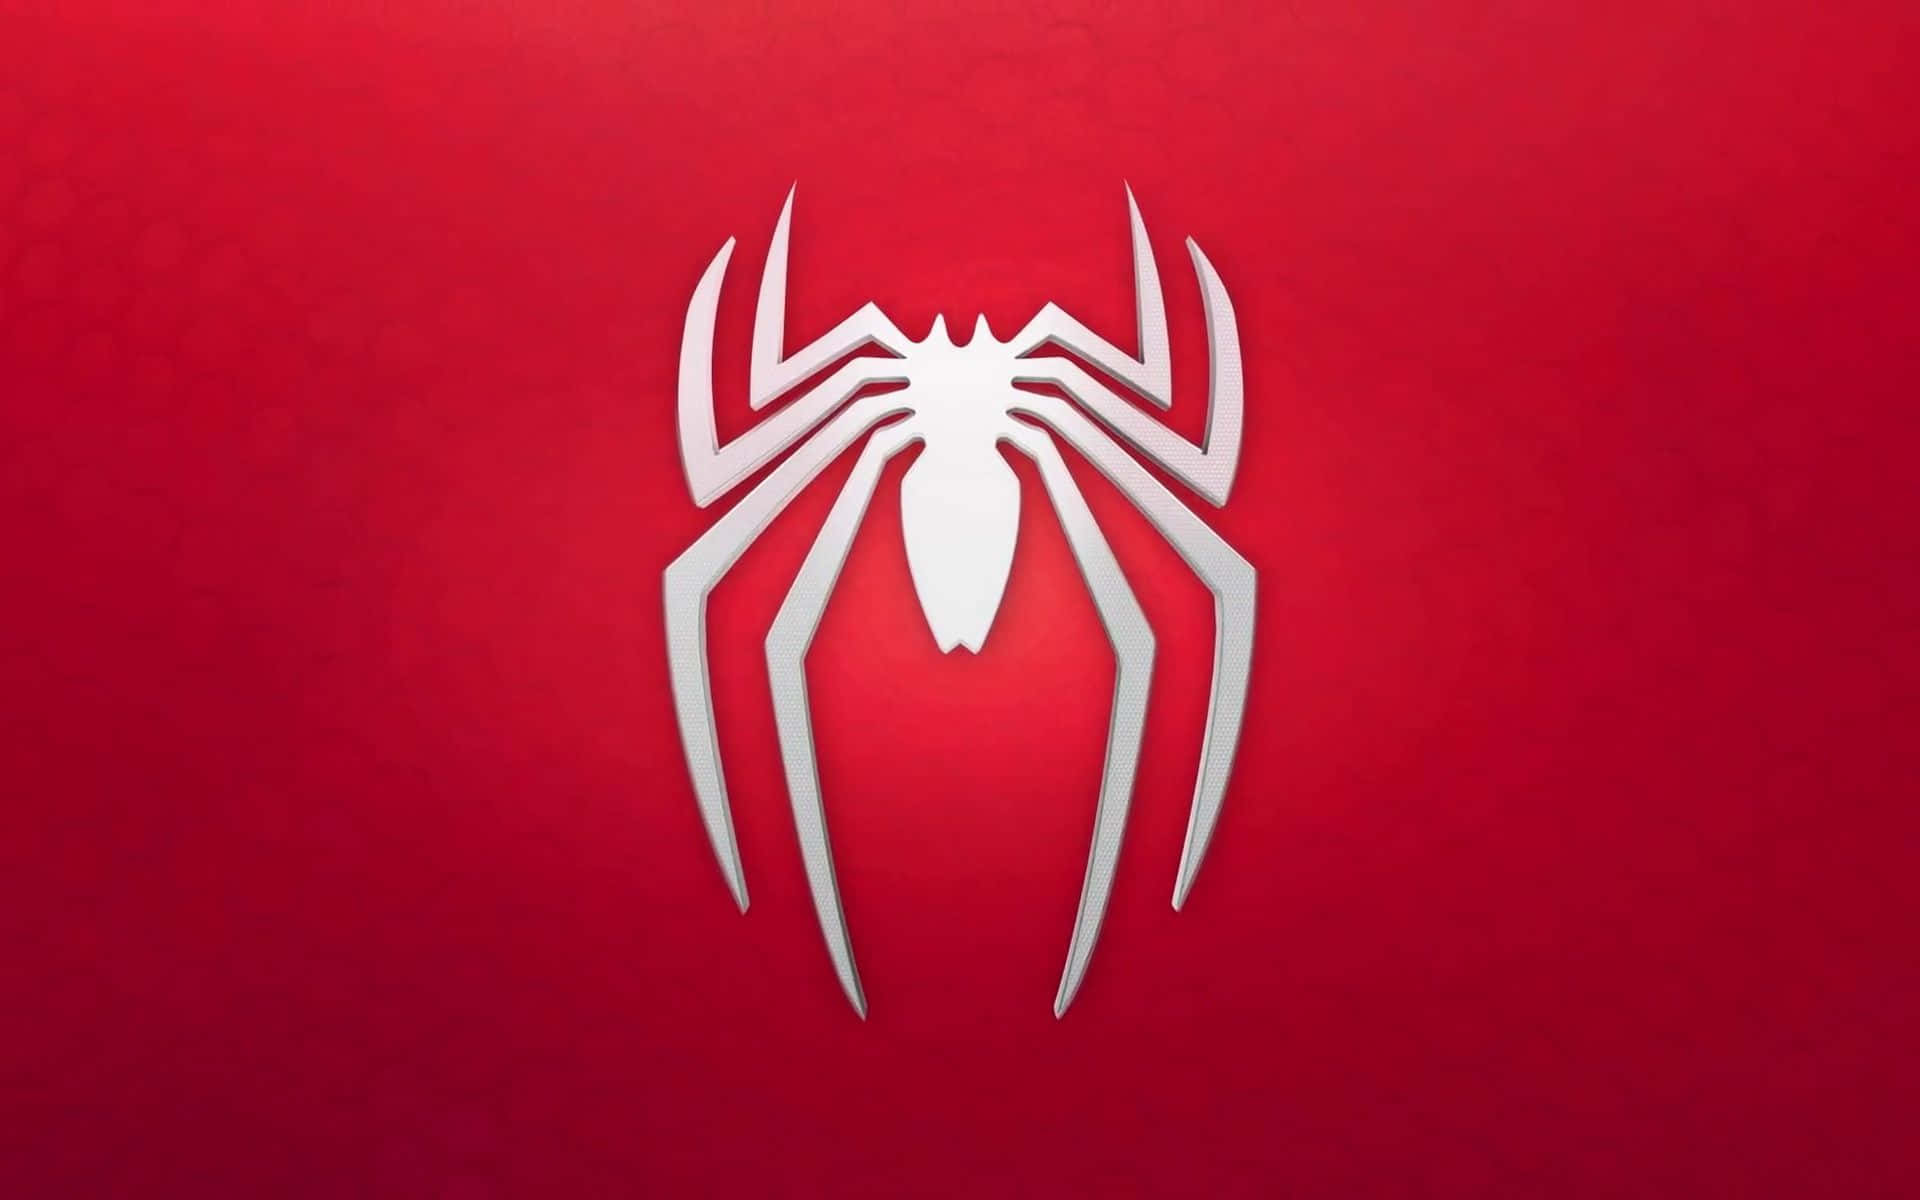 Spider Icon On A Solid Red Wallpaper